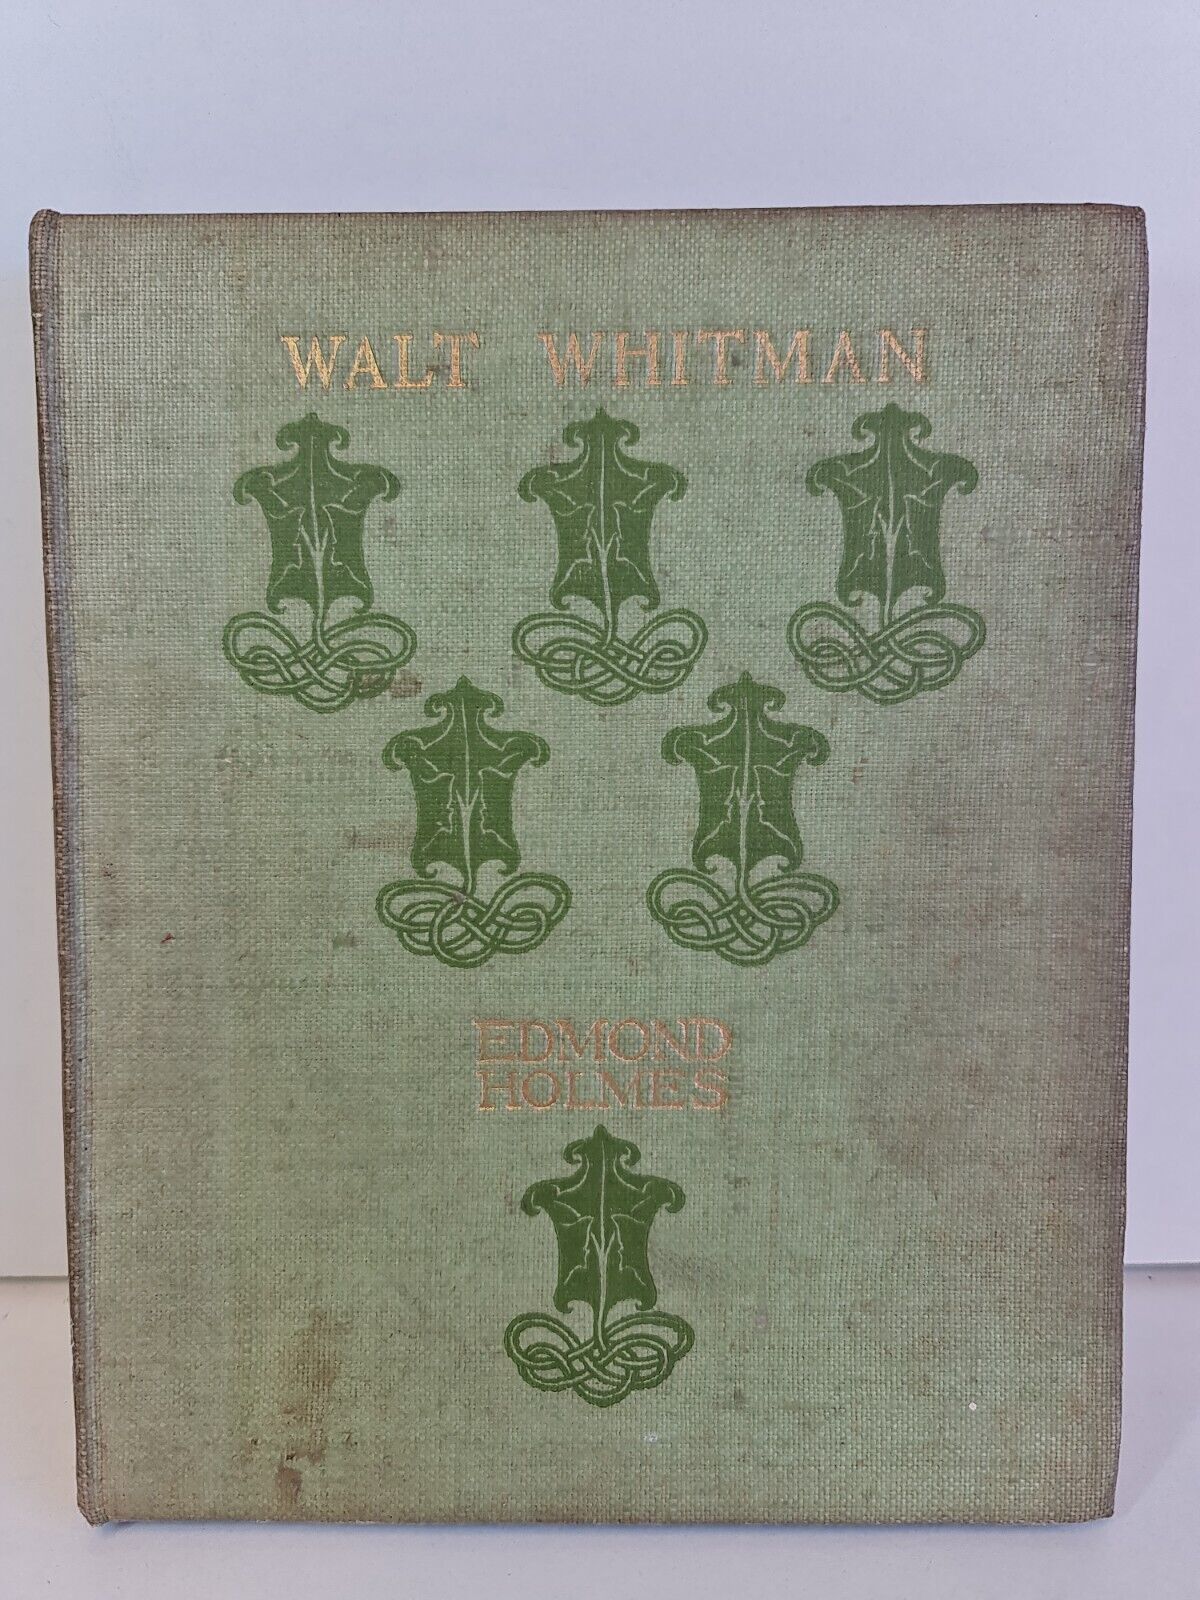 Walt Whitman's Poetry a Study & a Selection by Edmond Holmes (1902)